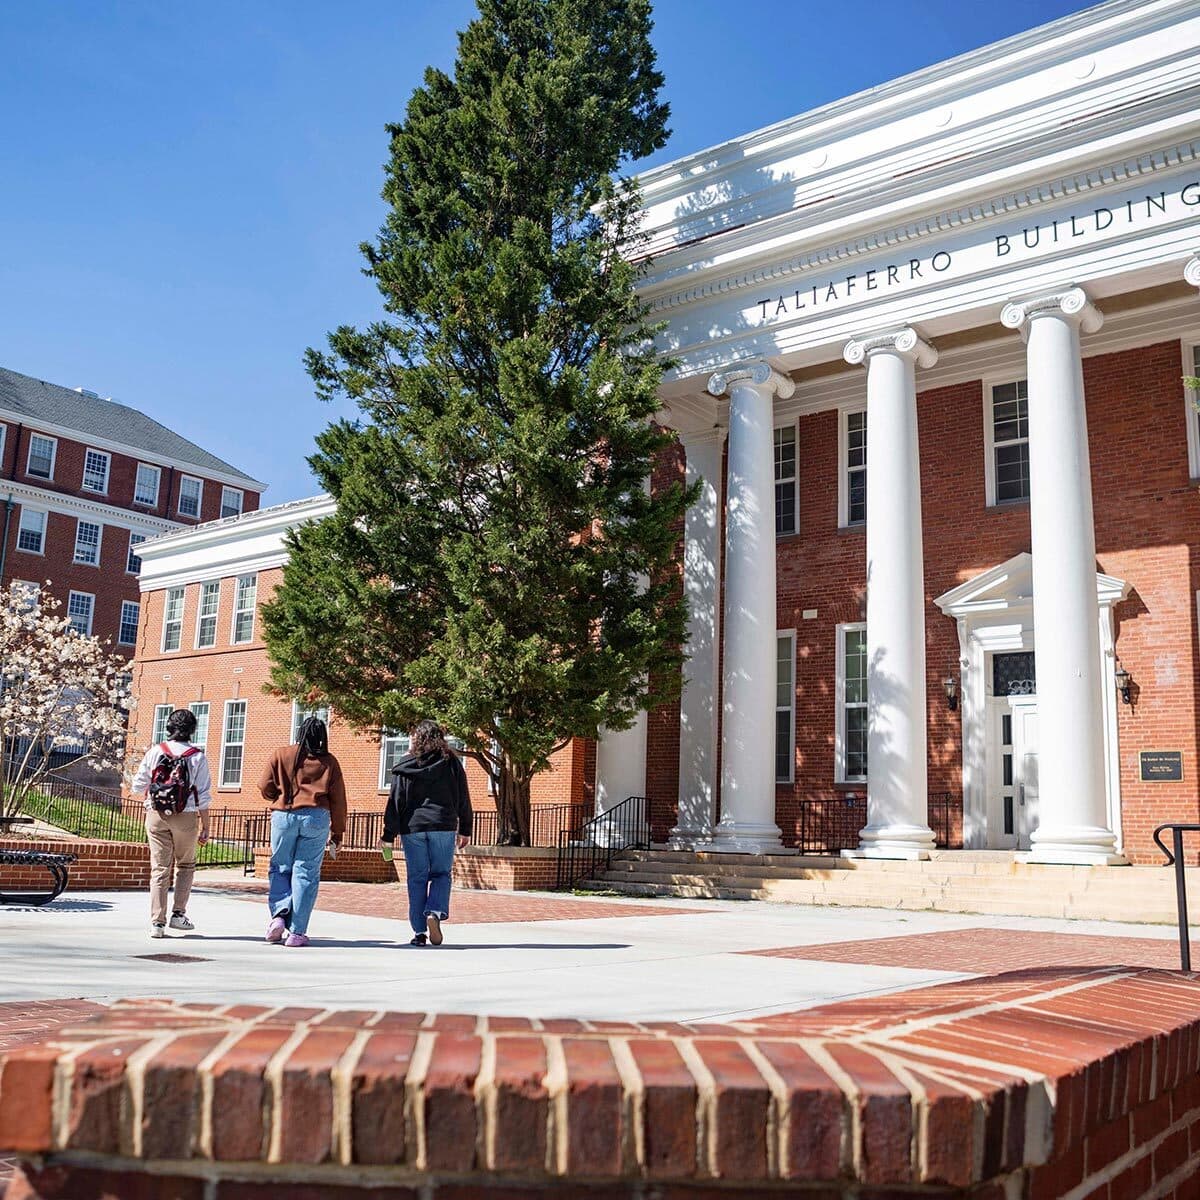 Three college students walk passed the wide square in front of the Taliaferro Building during a bright blue sky day in spring